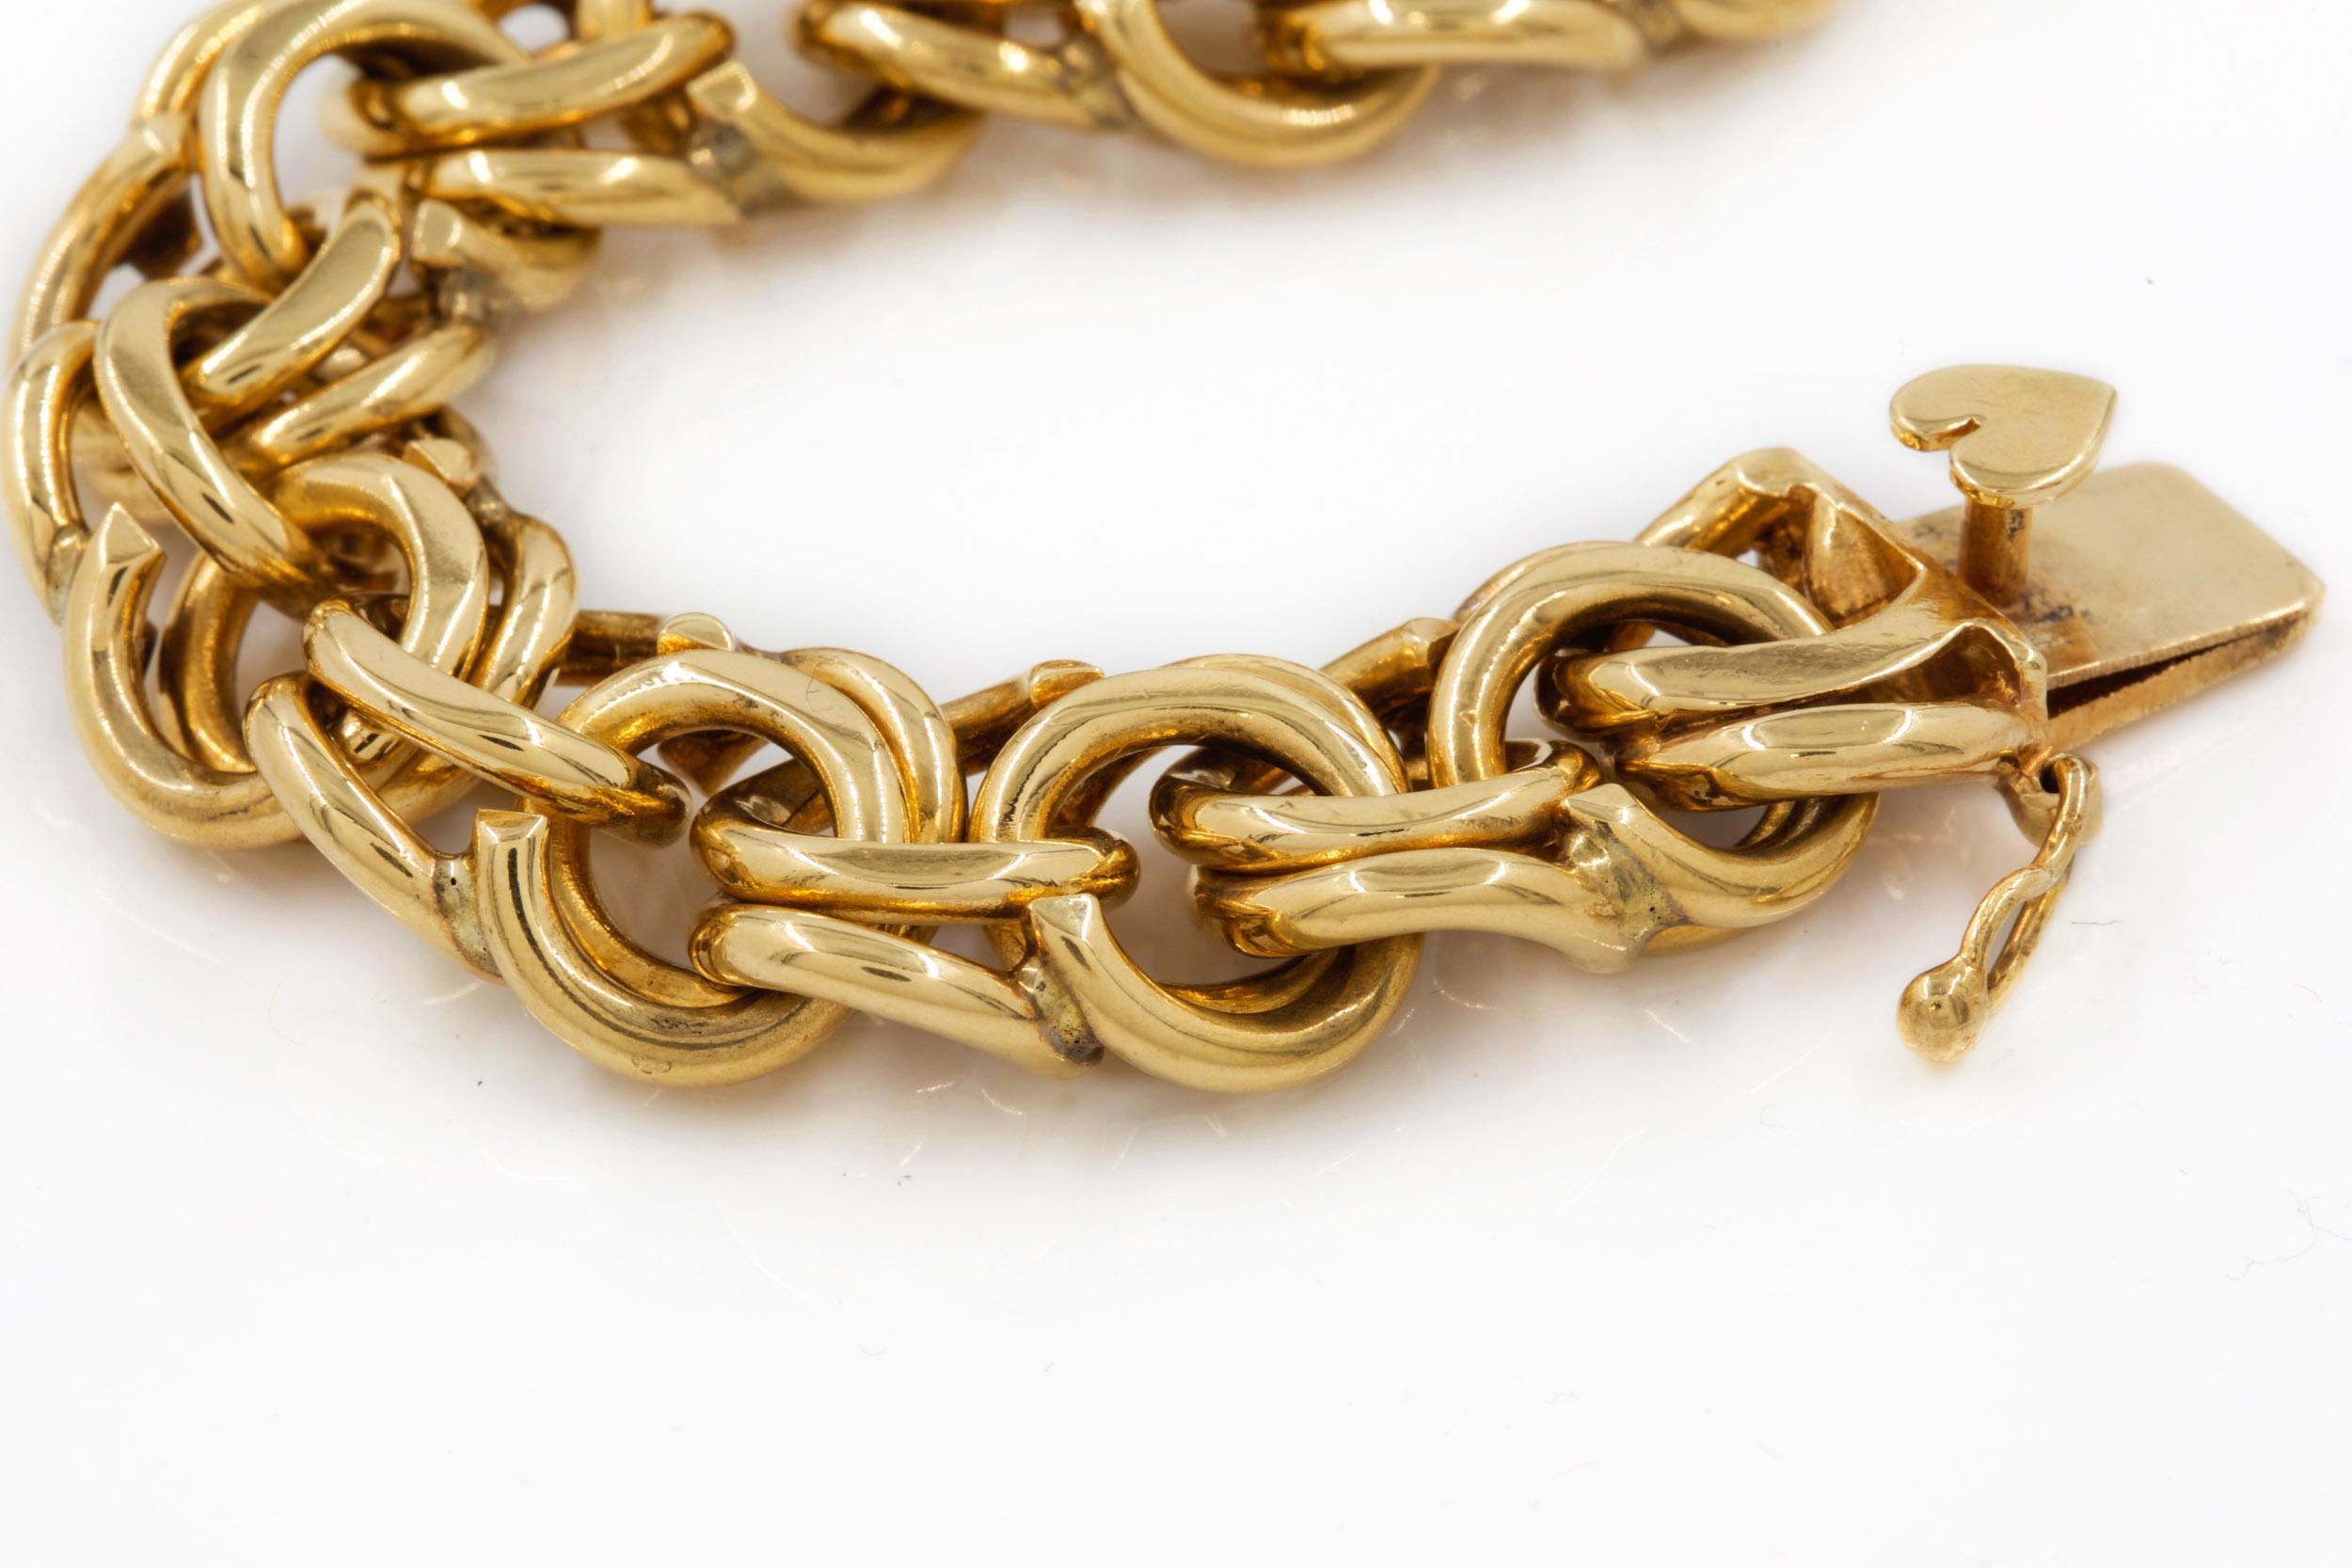 20th Century Fine 14K Gold Double-Link Bracelet with Heart Clasp, 7 1/2